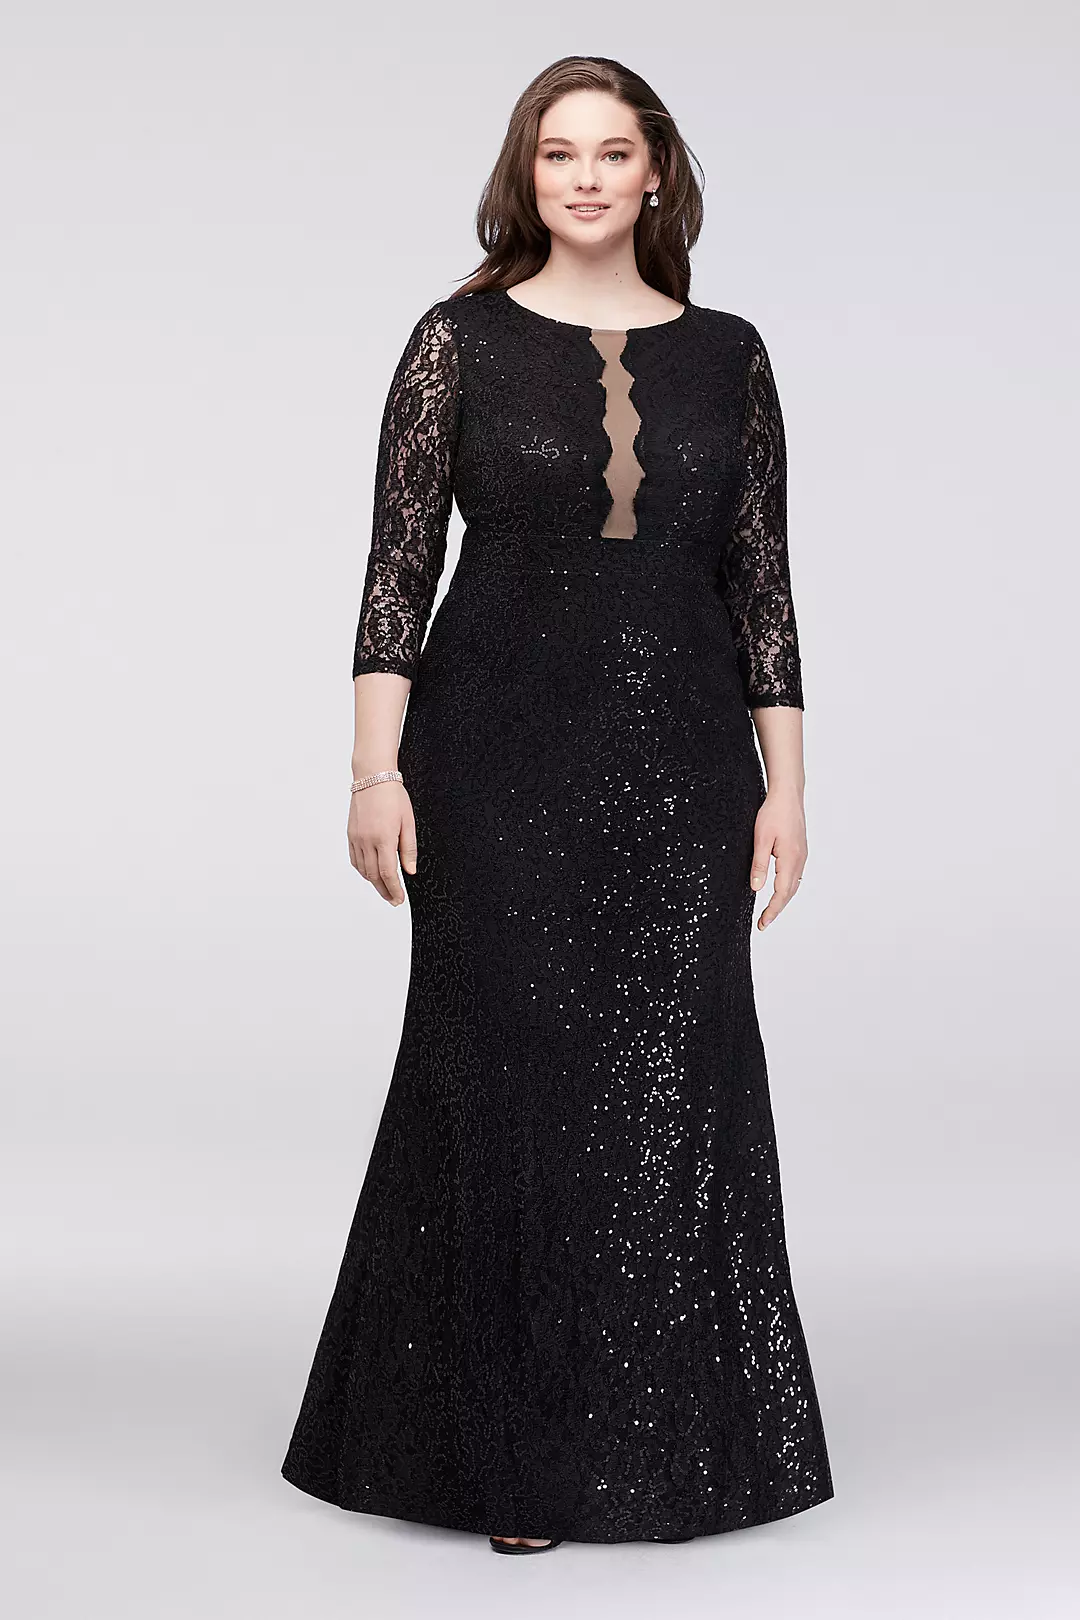 Sequined Lace Plus Size Gown with Illusion Bodice Image